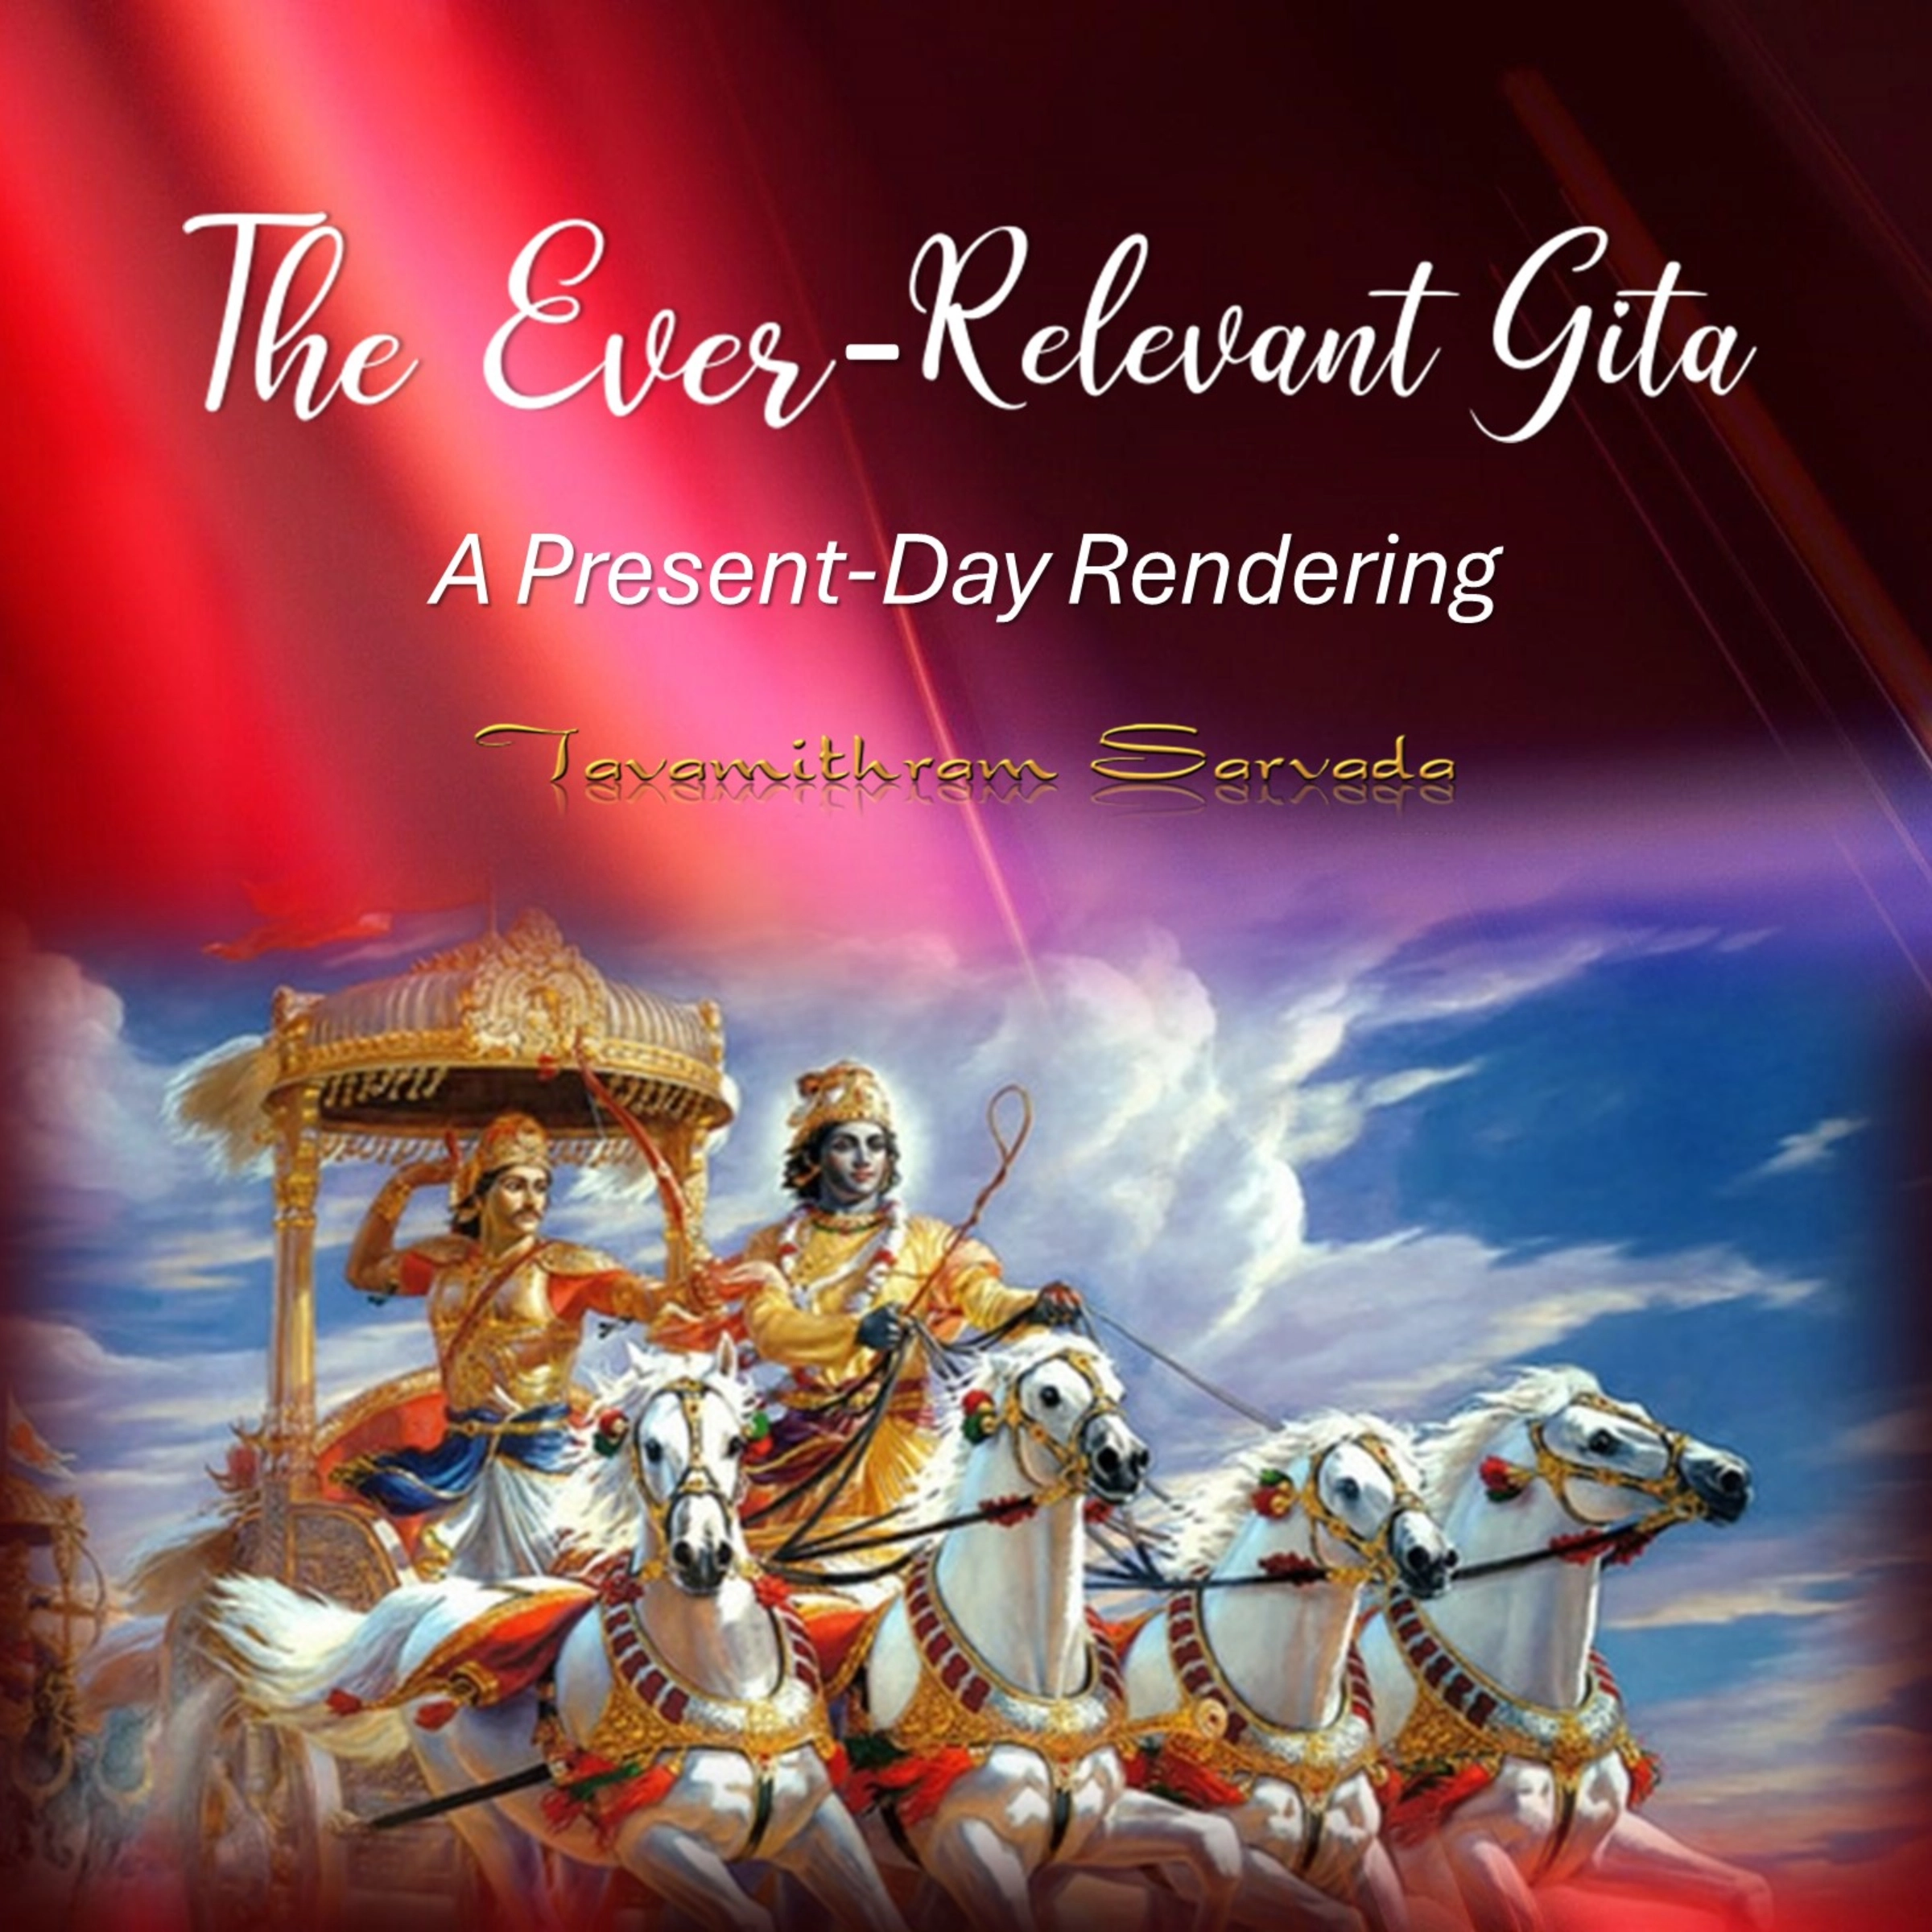 The Ever-Relevant Gita: A Present-Day Rendering Audiobook by Tavamithram Sarvada